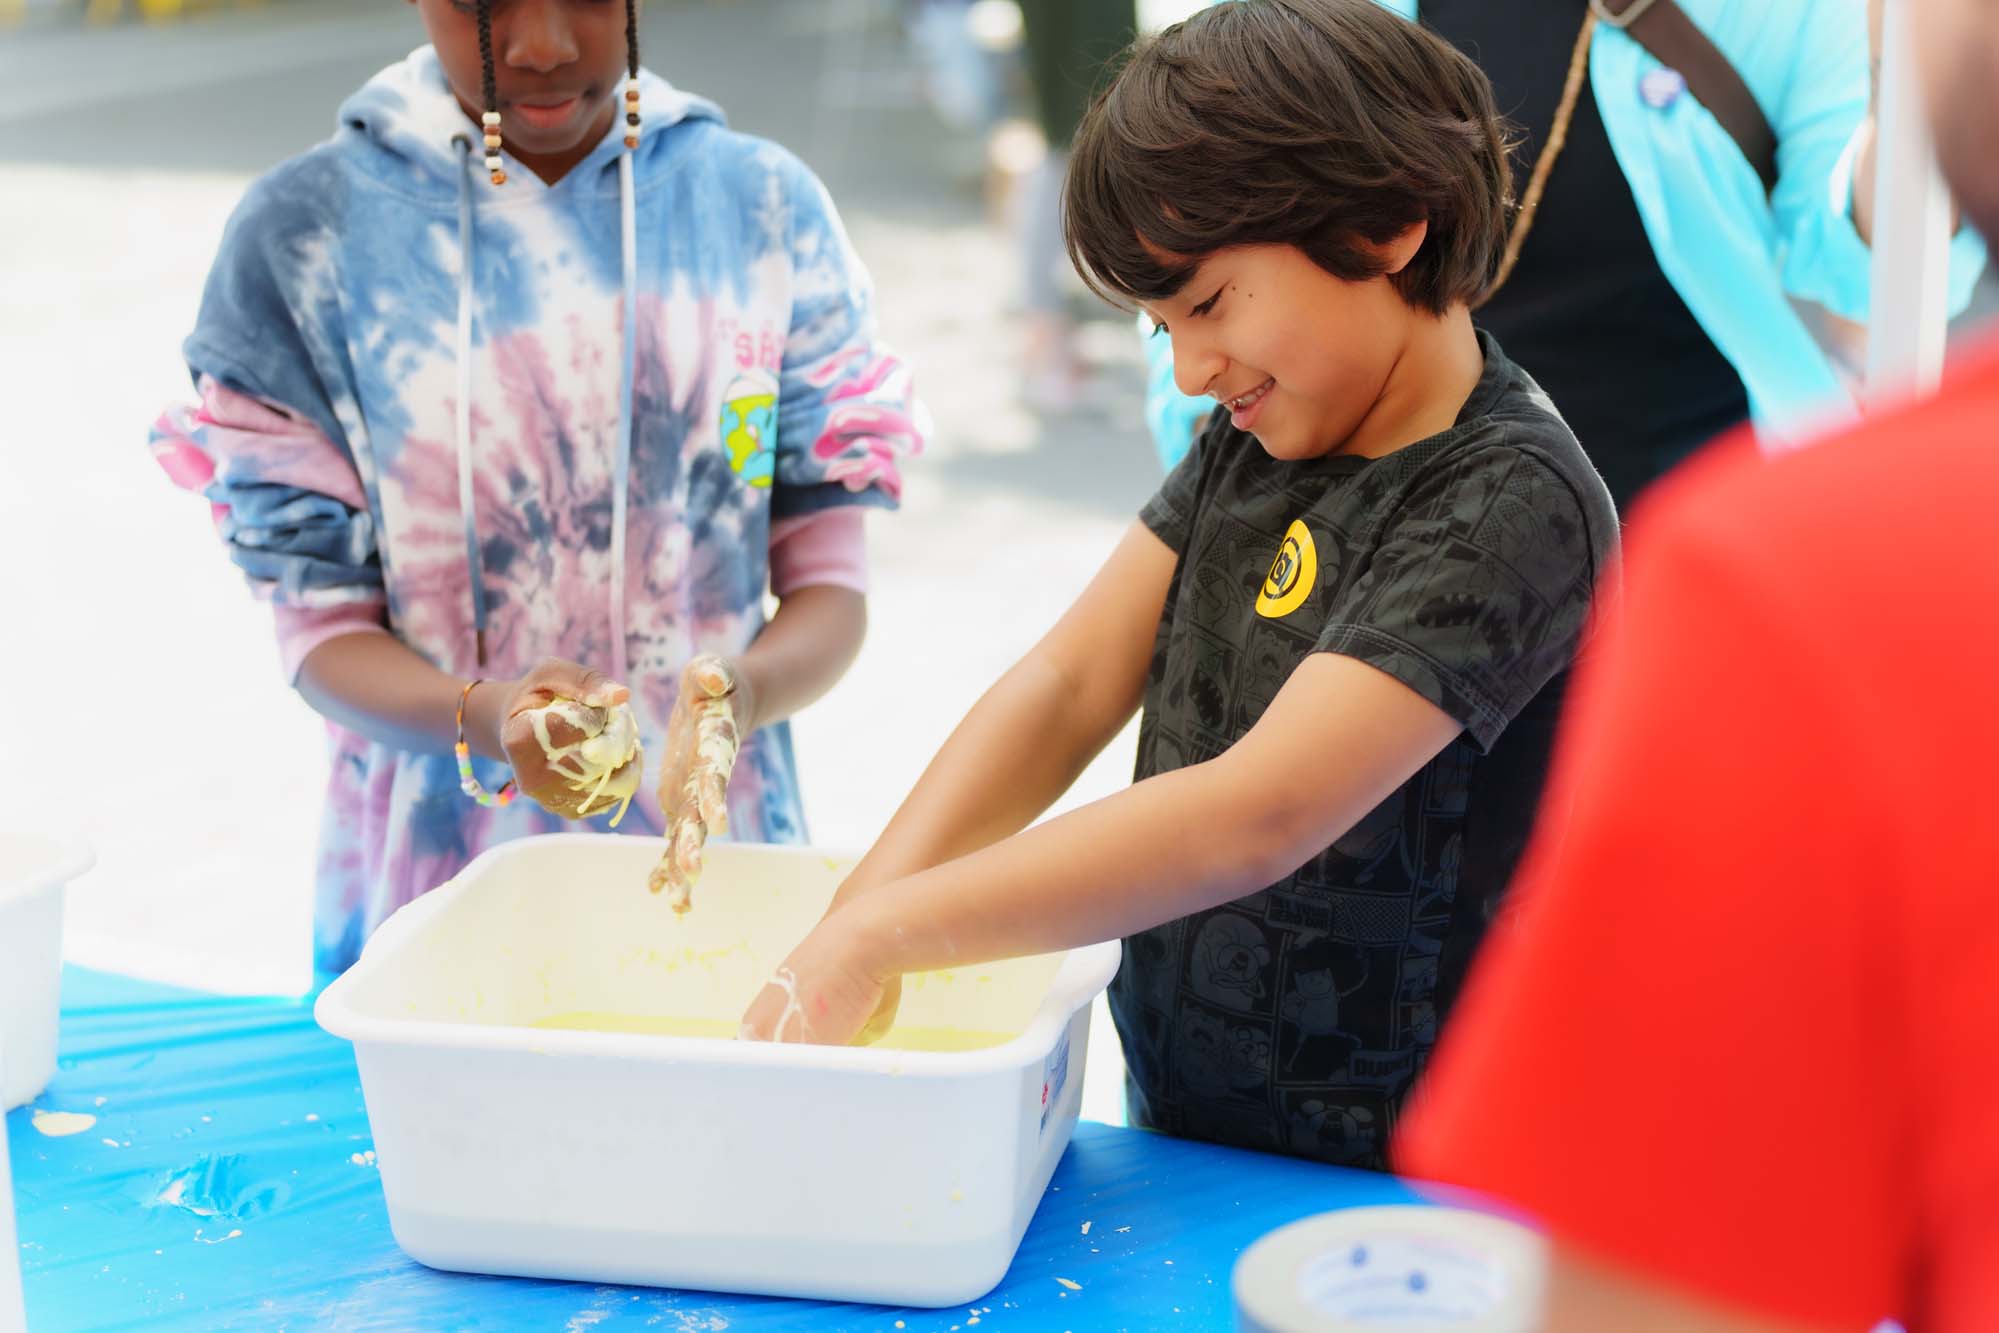 Two children playing with the yellow slime in a white container.